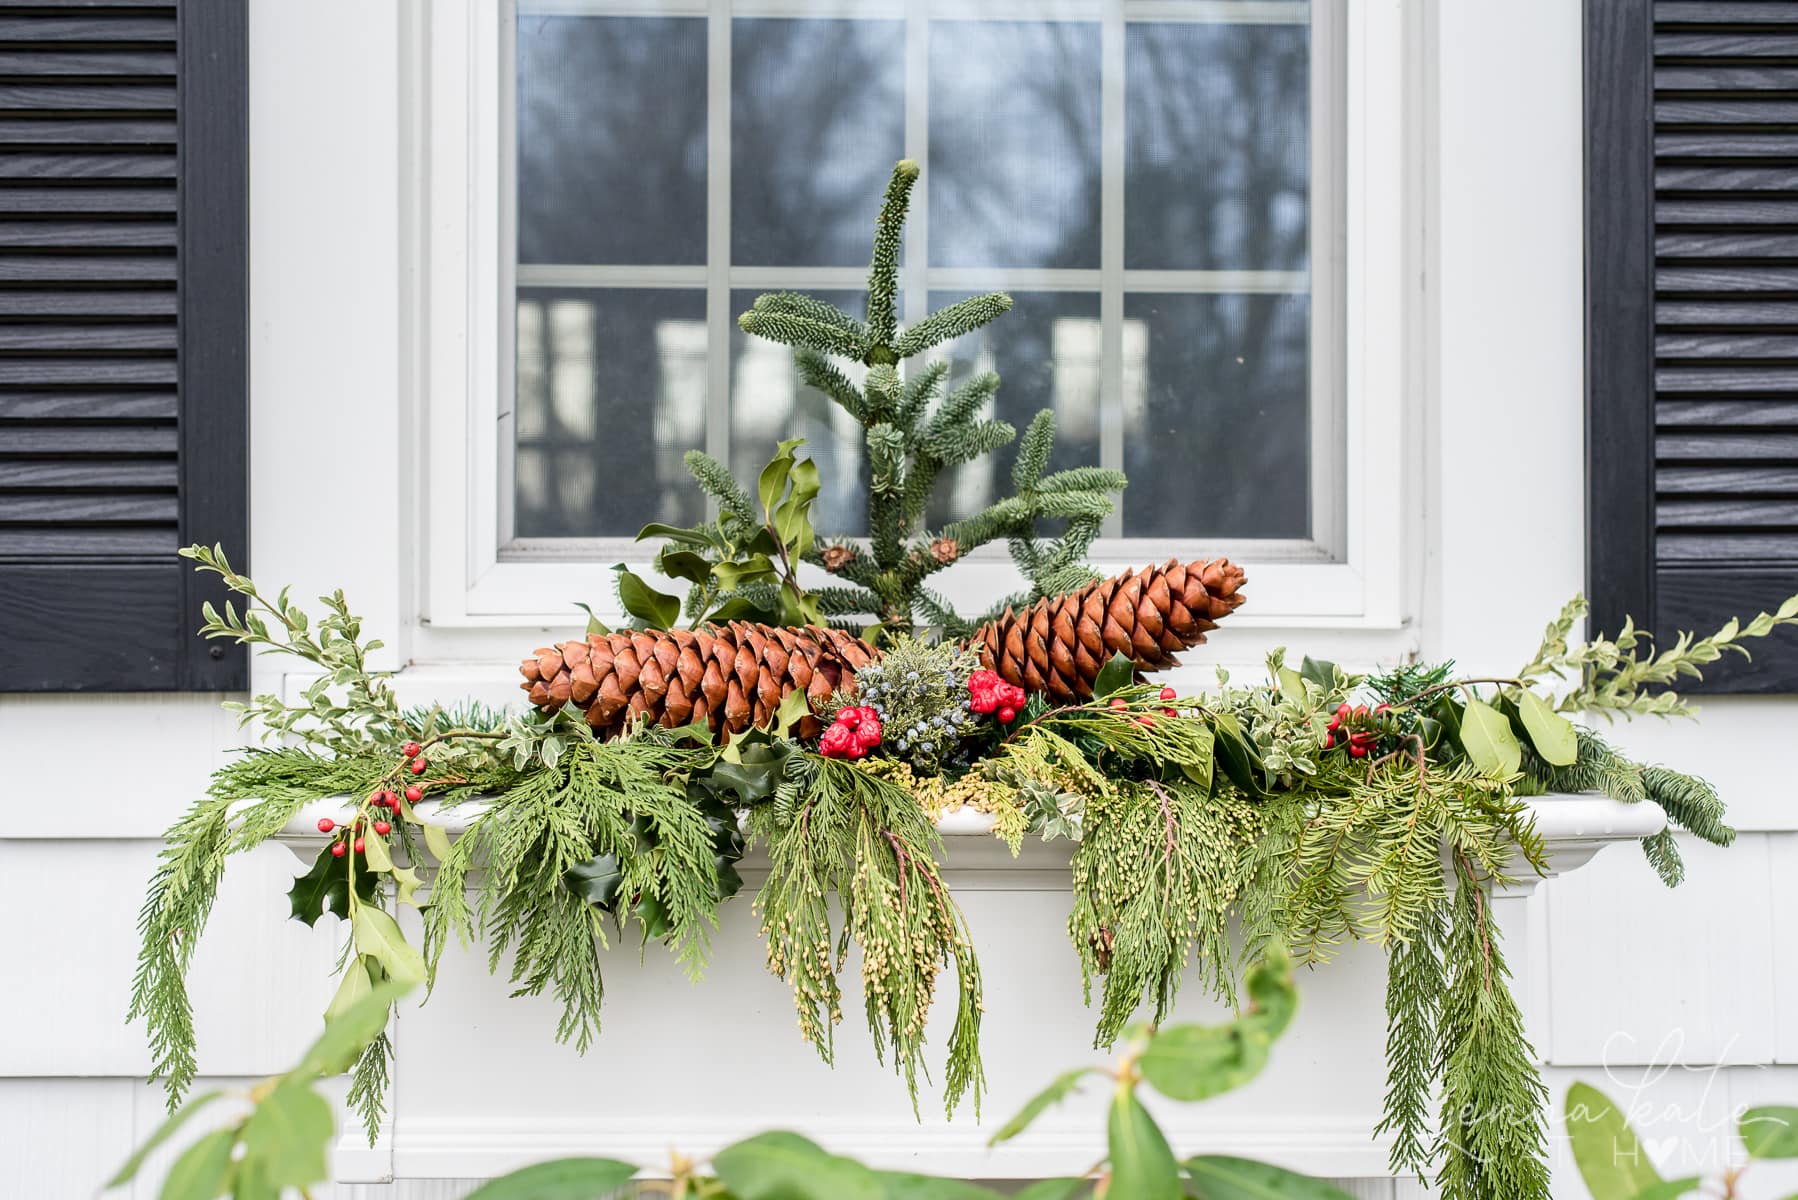 Window box filled with Christmas greenery, pinecones and berries